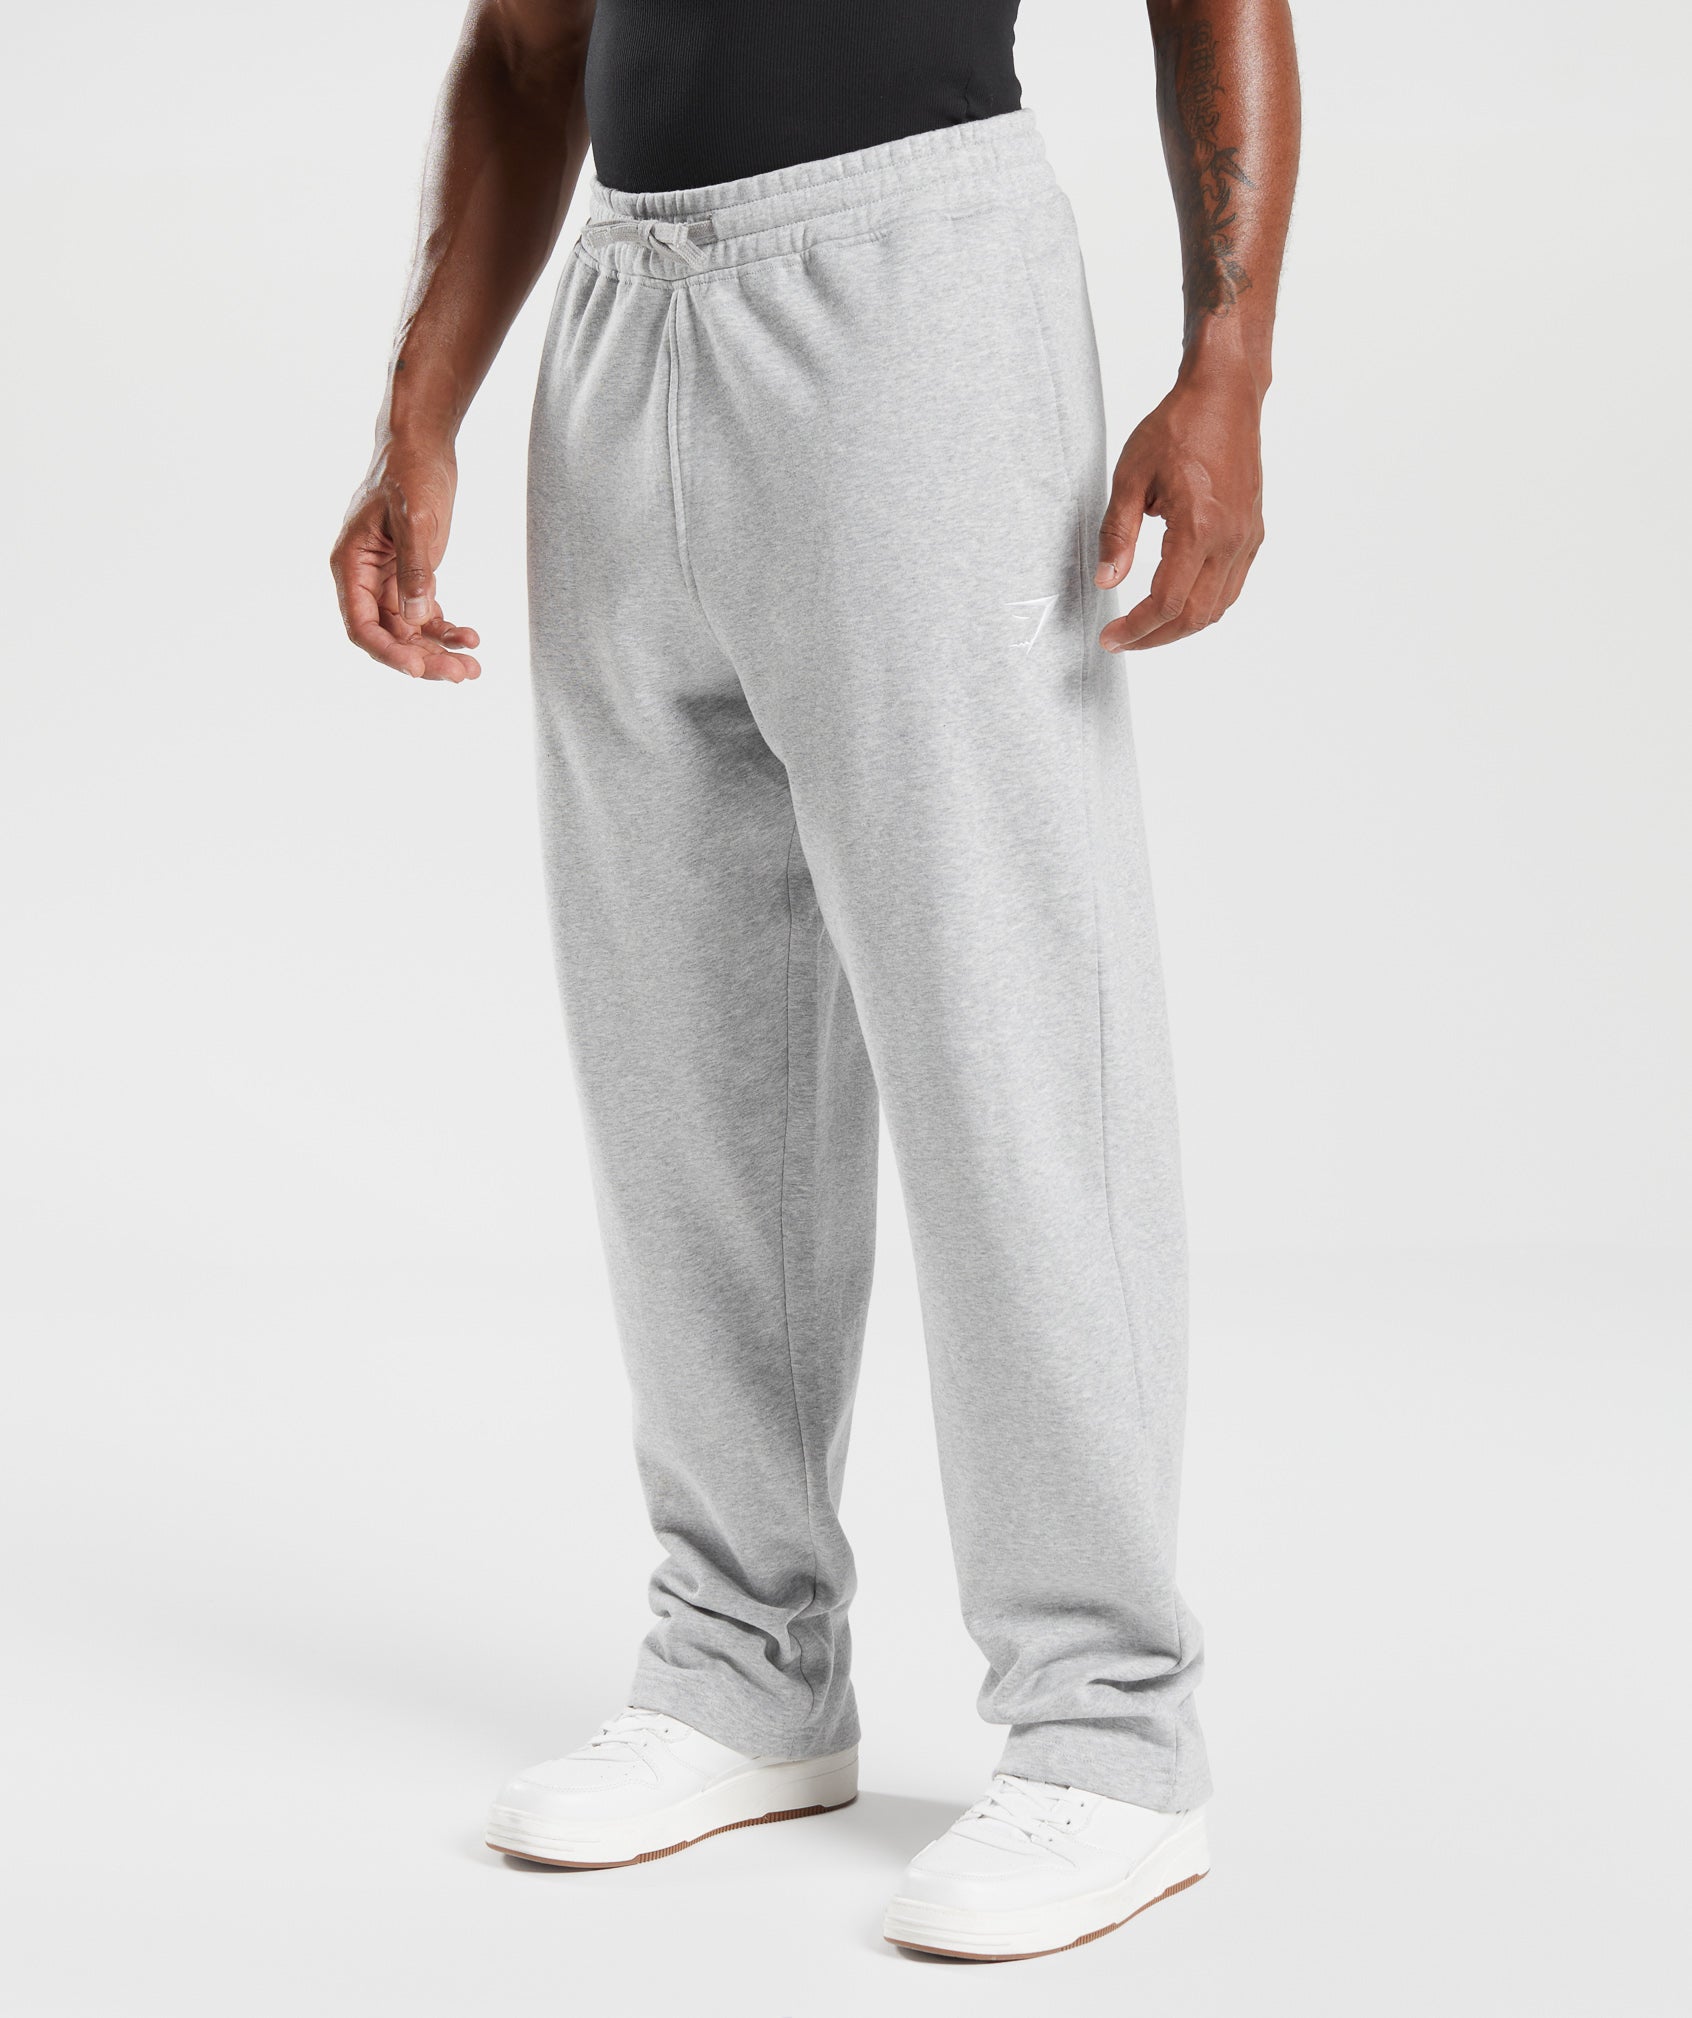 Crest Straight Leg Joggers in Light Grey Marl - view 3